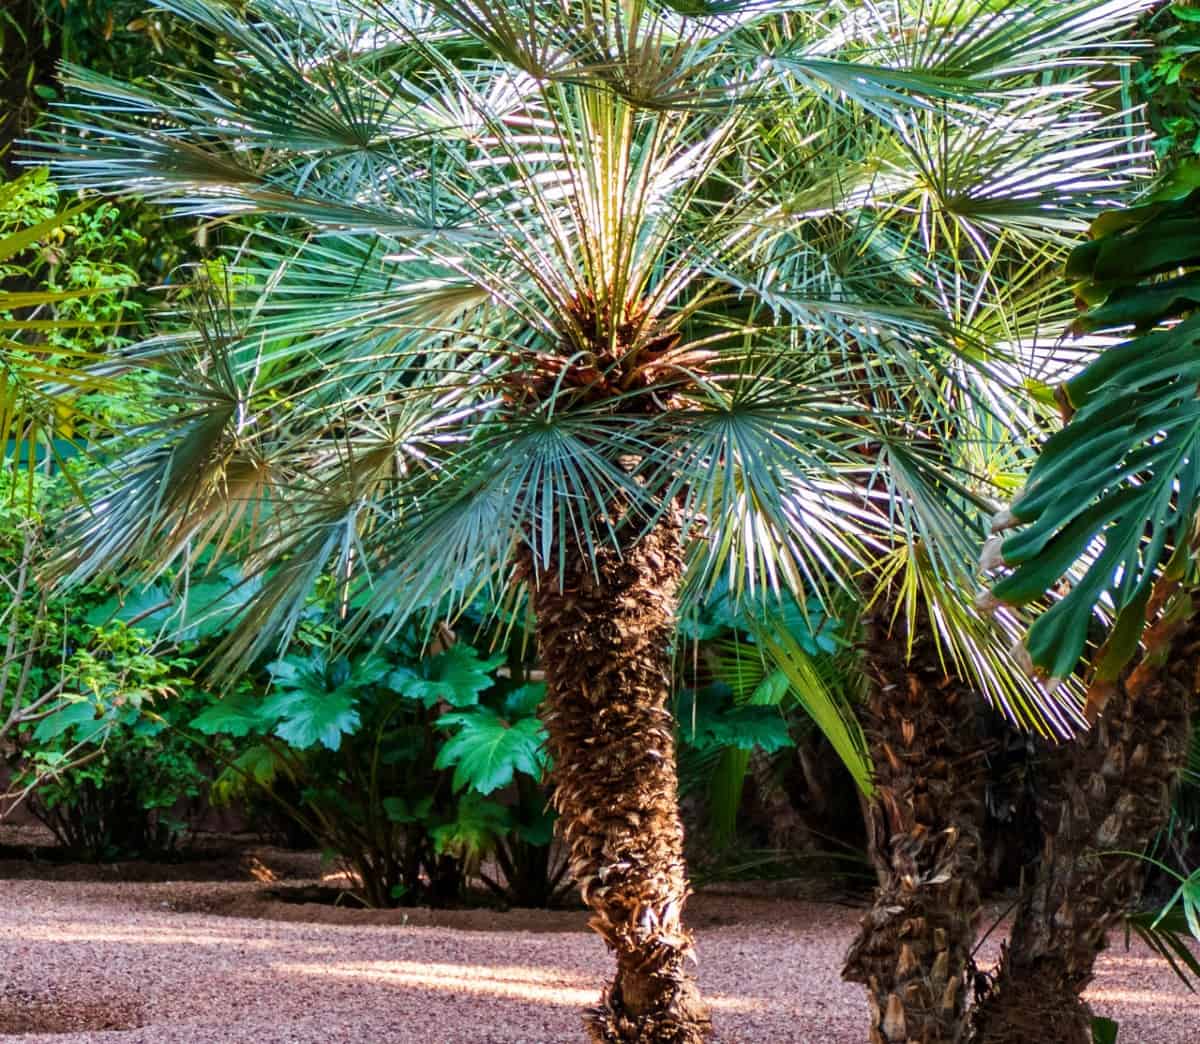 European fan palms are cold-hardy trees with multiple trunks.